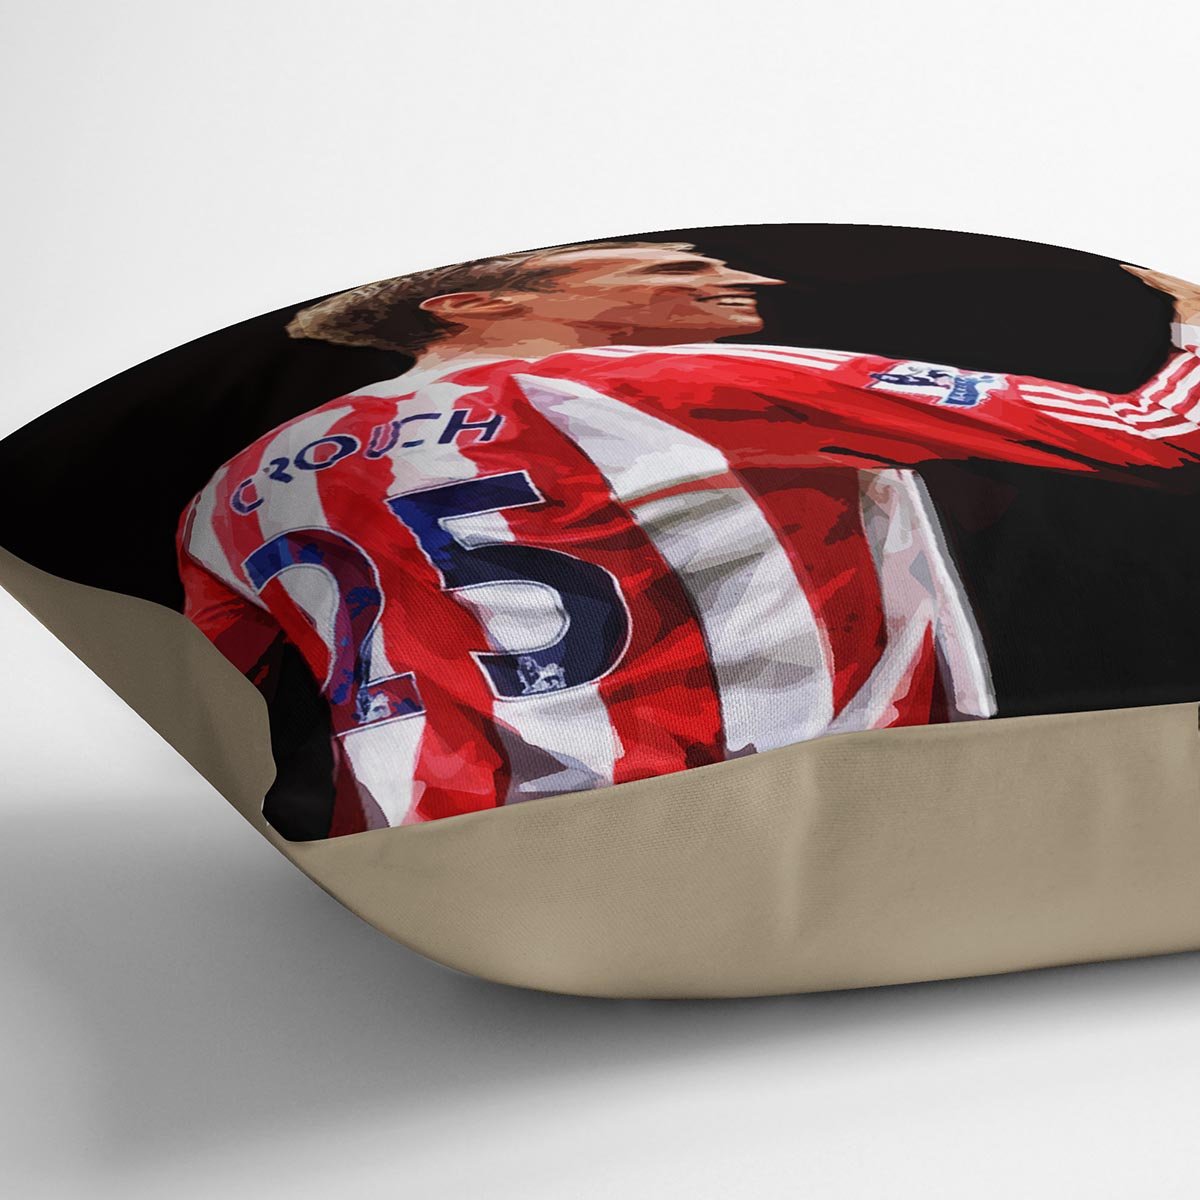 Peter Crouch Stoke City Cushion